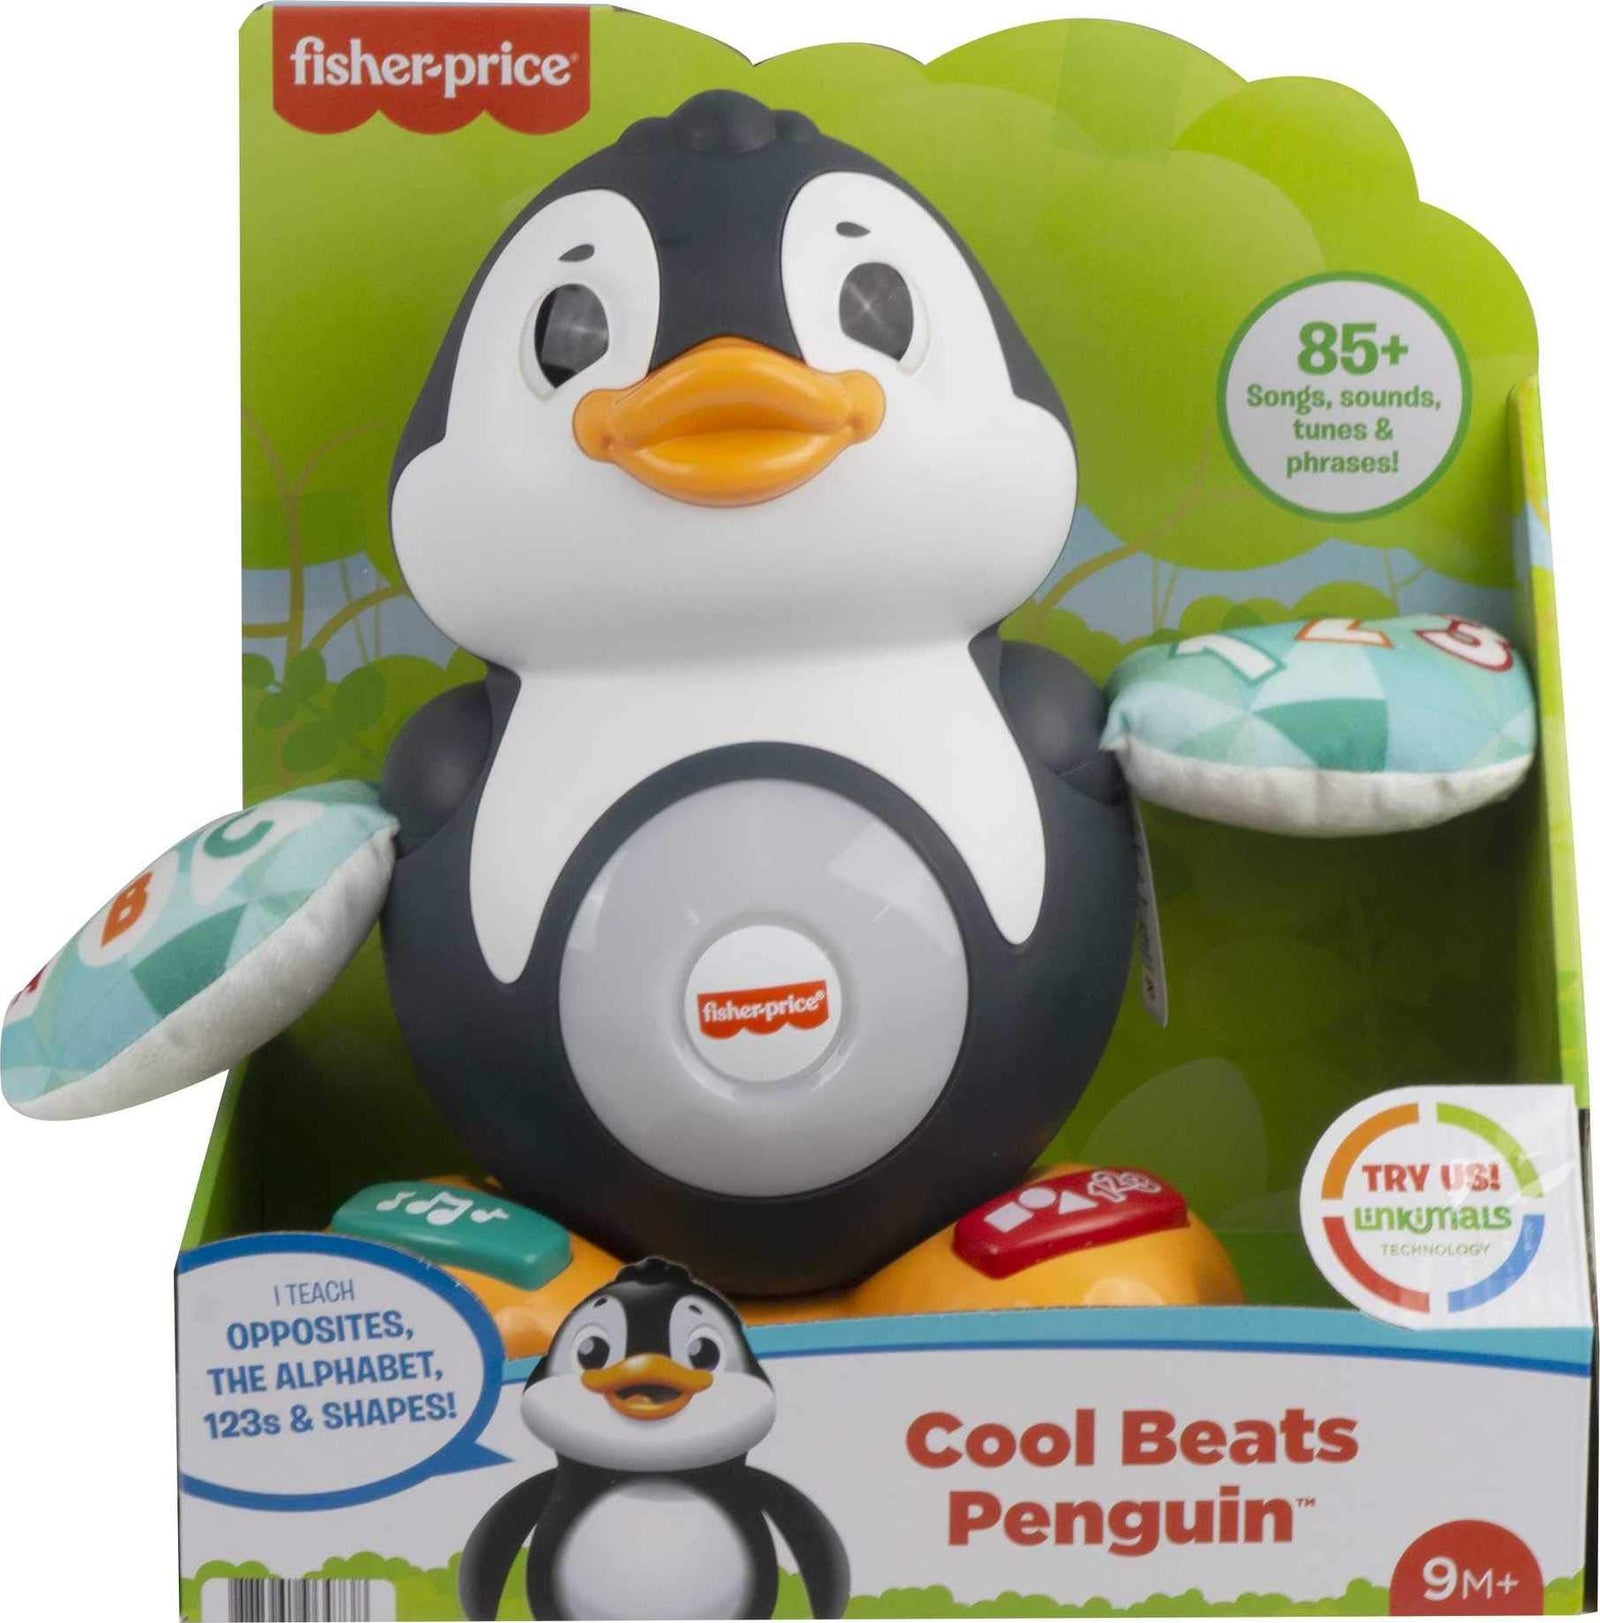 Fisher-Price Linkimals Cool Beats Penguin, Musical Infant Toy with Lights, Motions, and Educational Songs for Infants and Toddlers